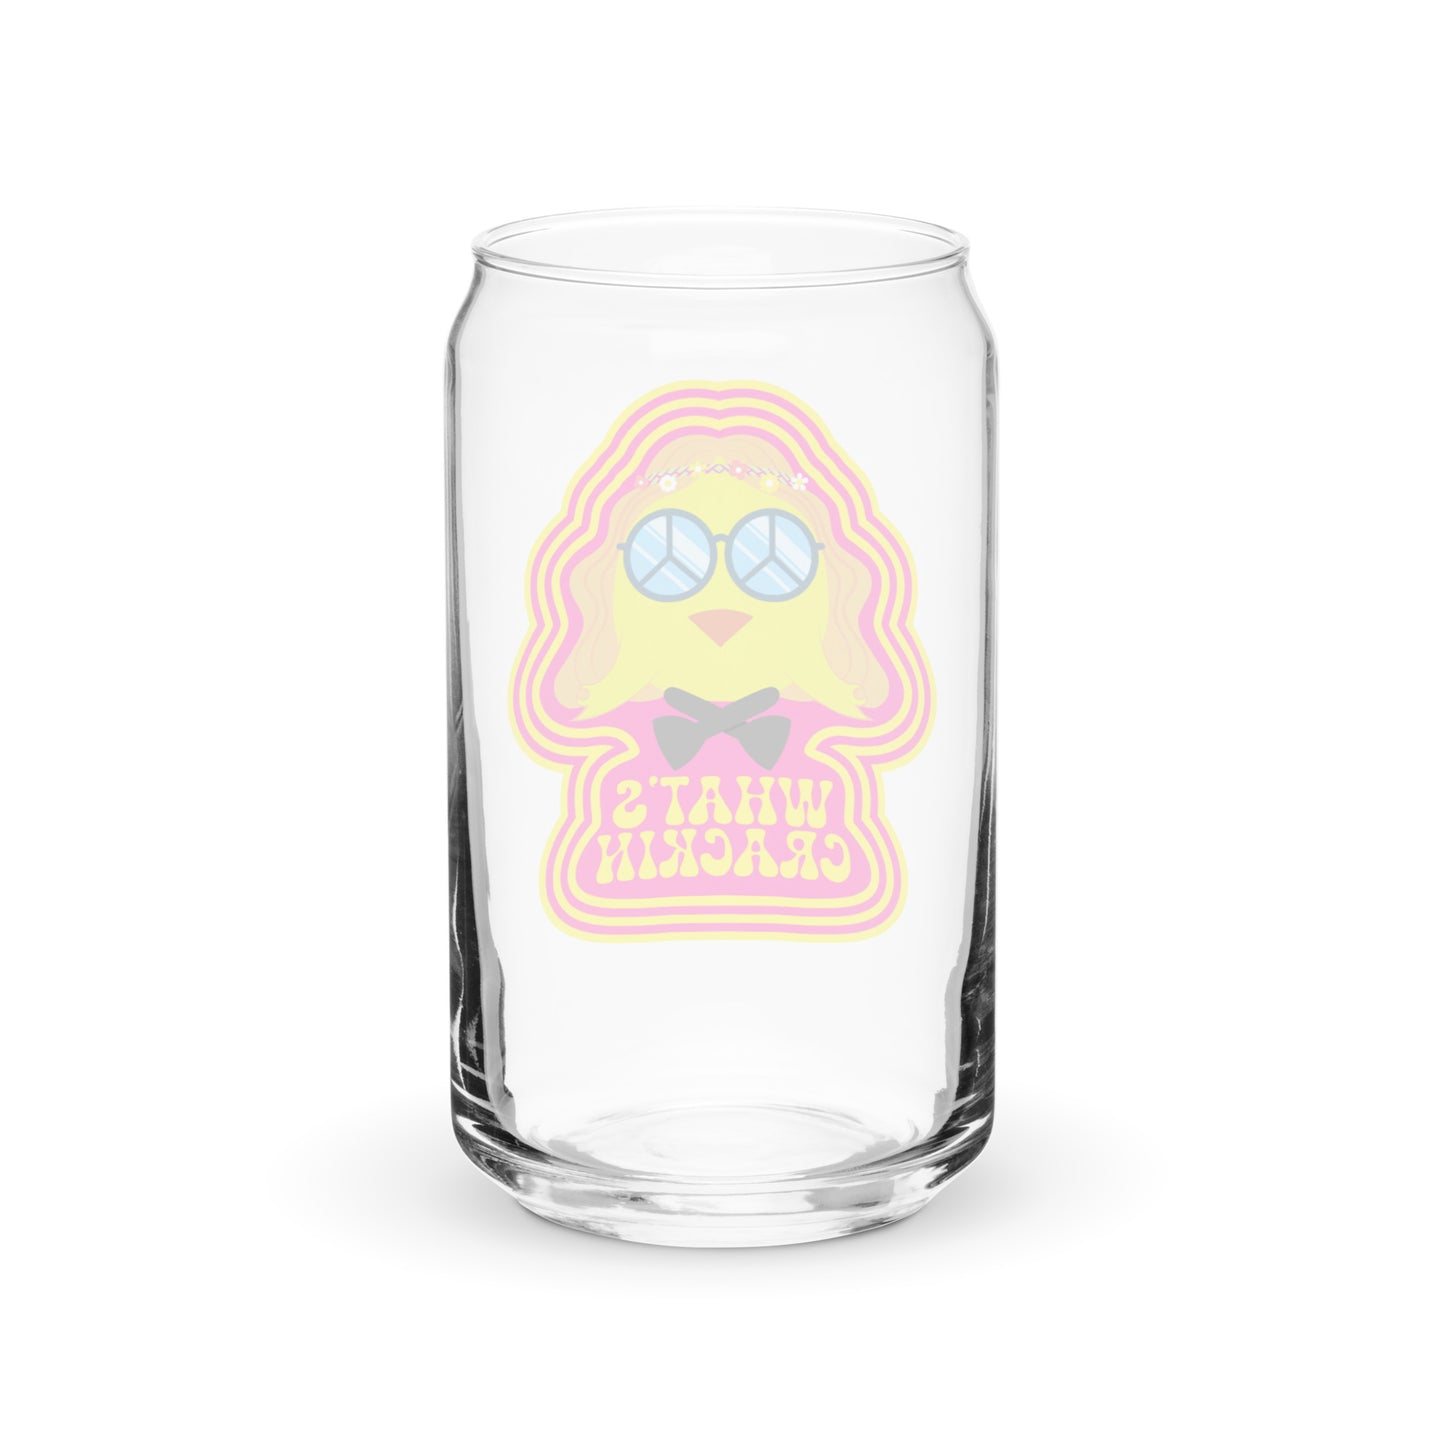 Hippie Chick Can-shaped glass